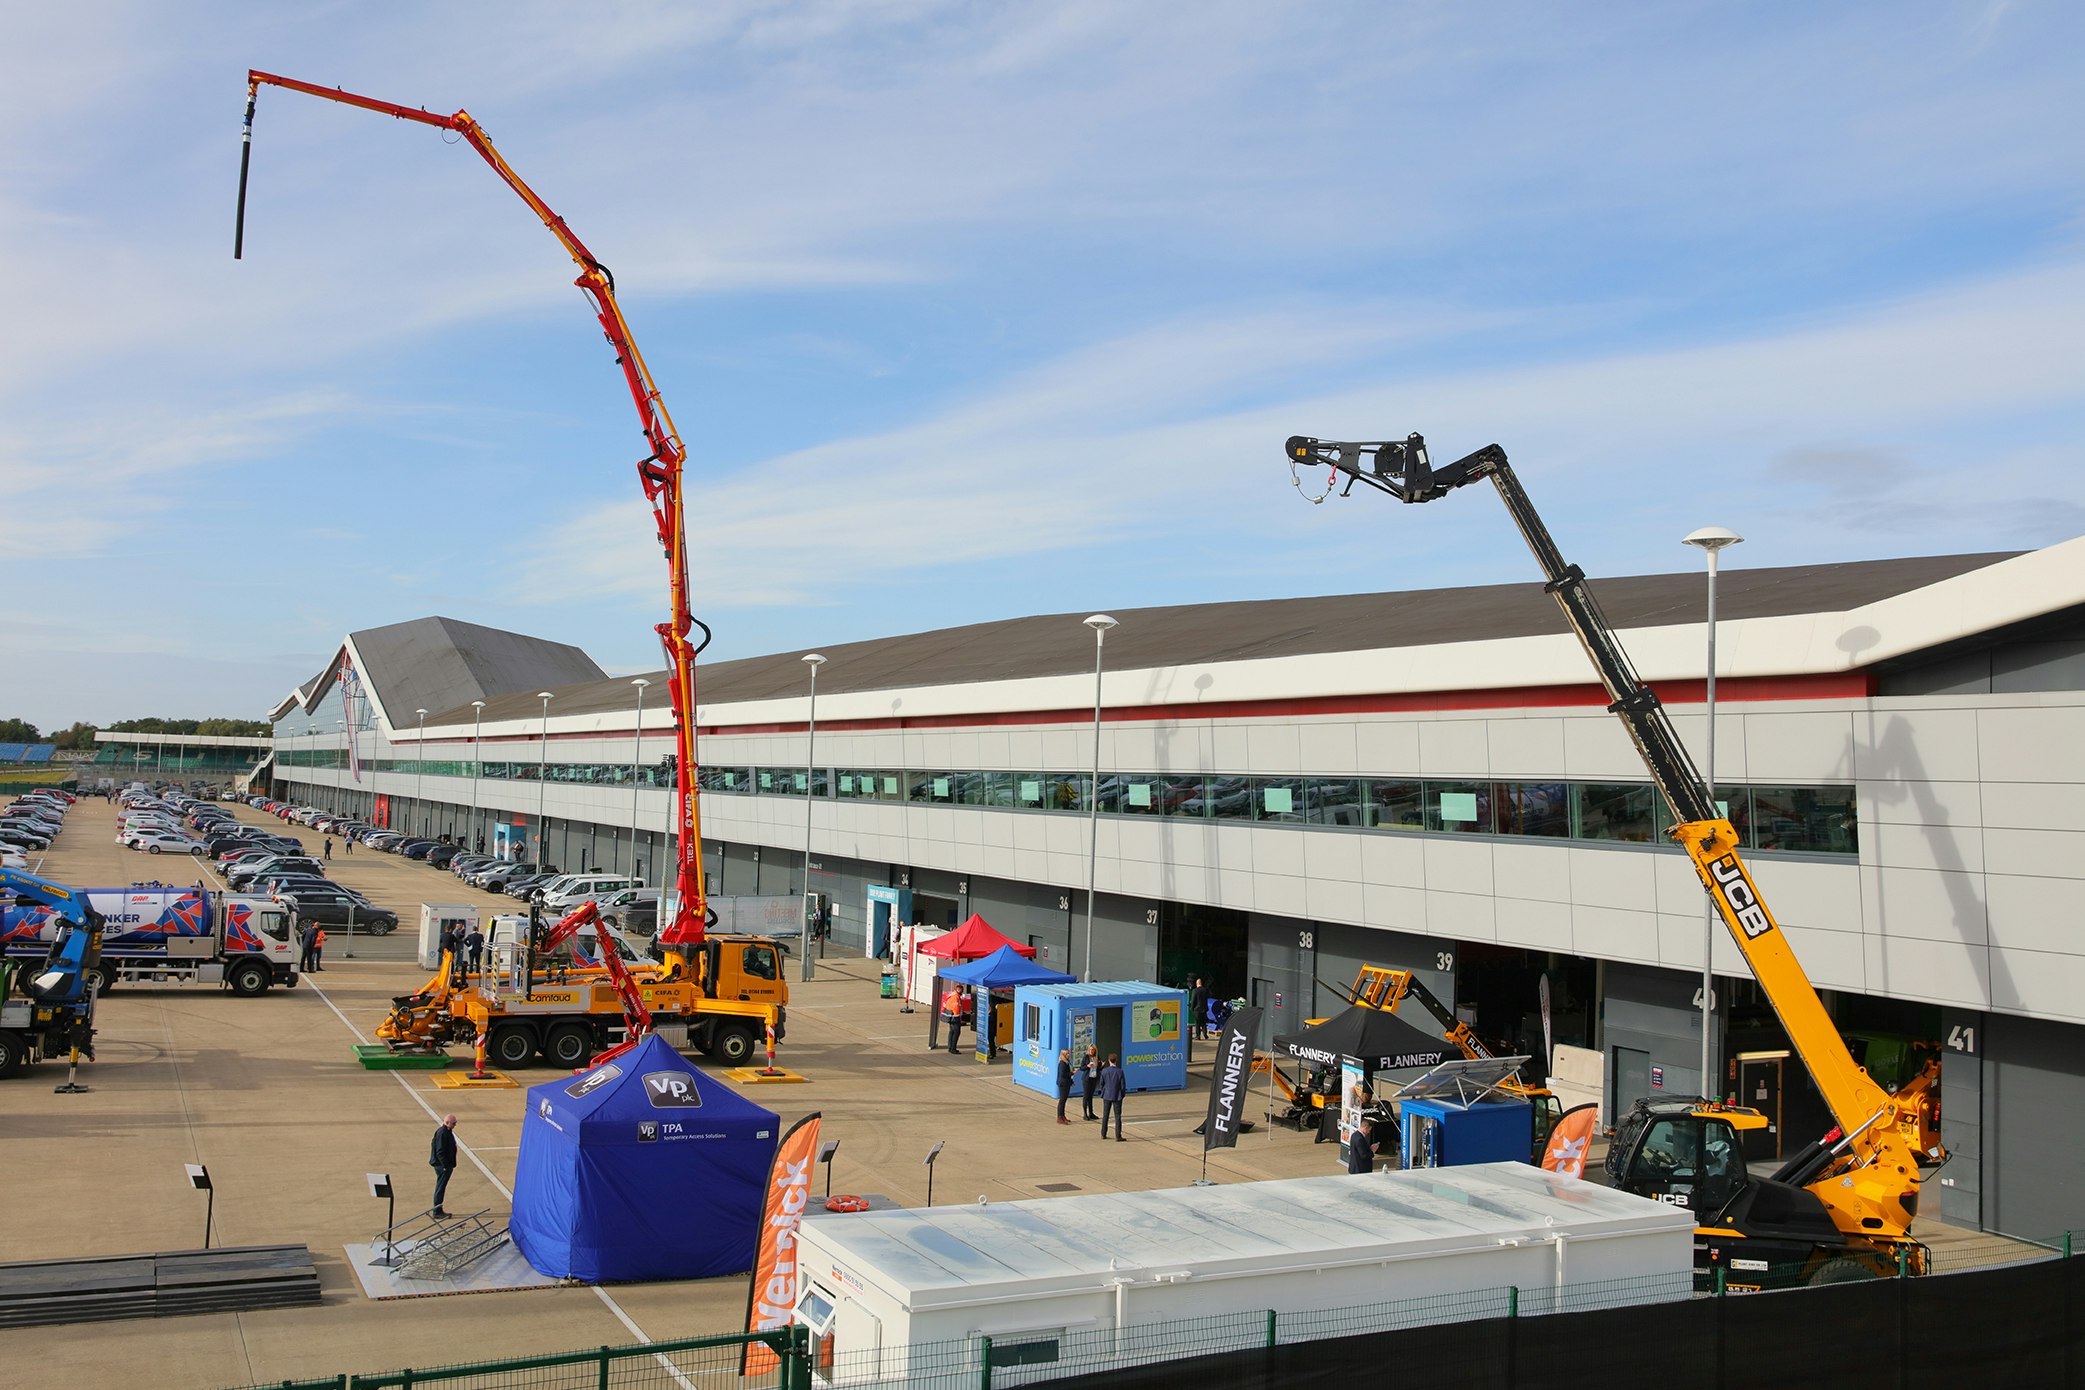 Silverstone International Conference & Exhibition Centre - Hall 1 image 2